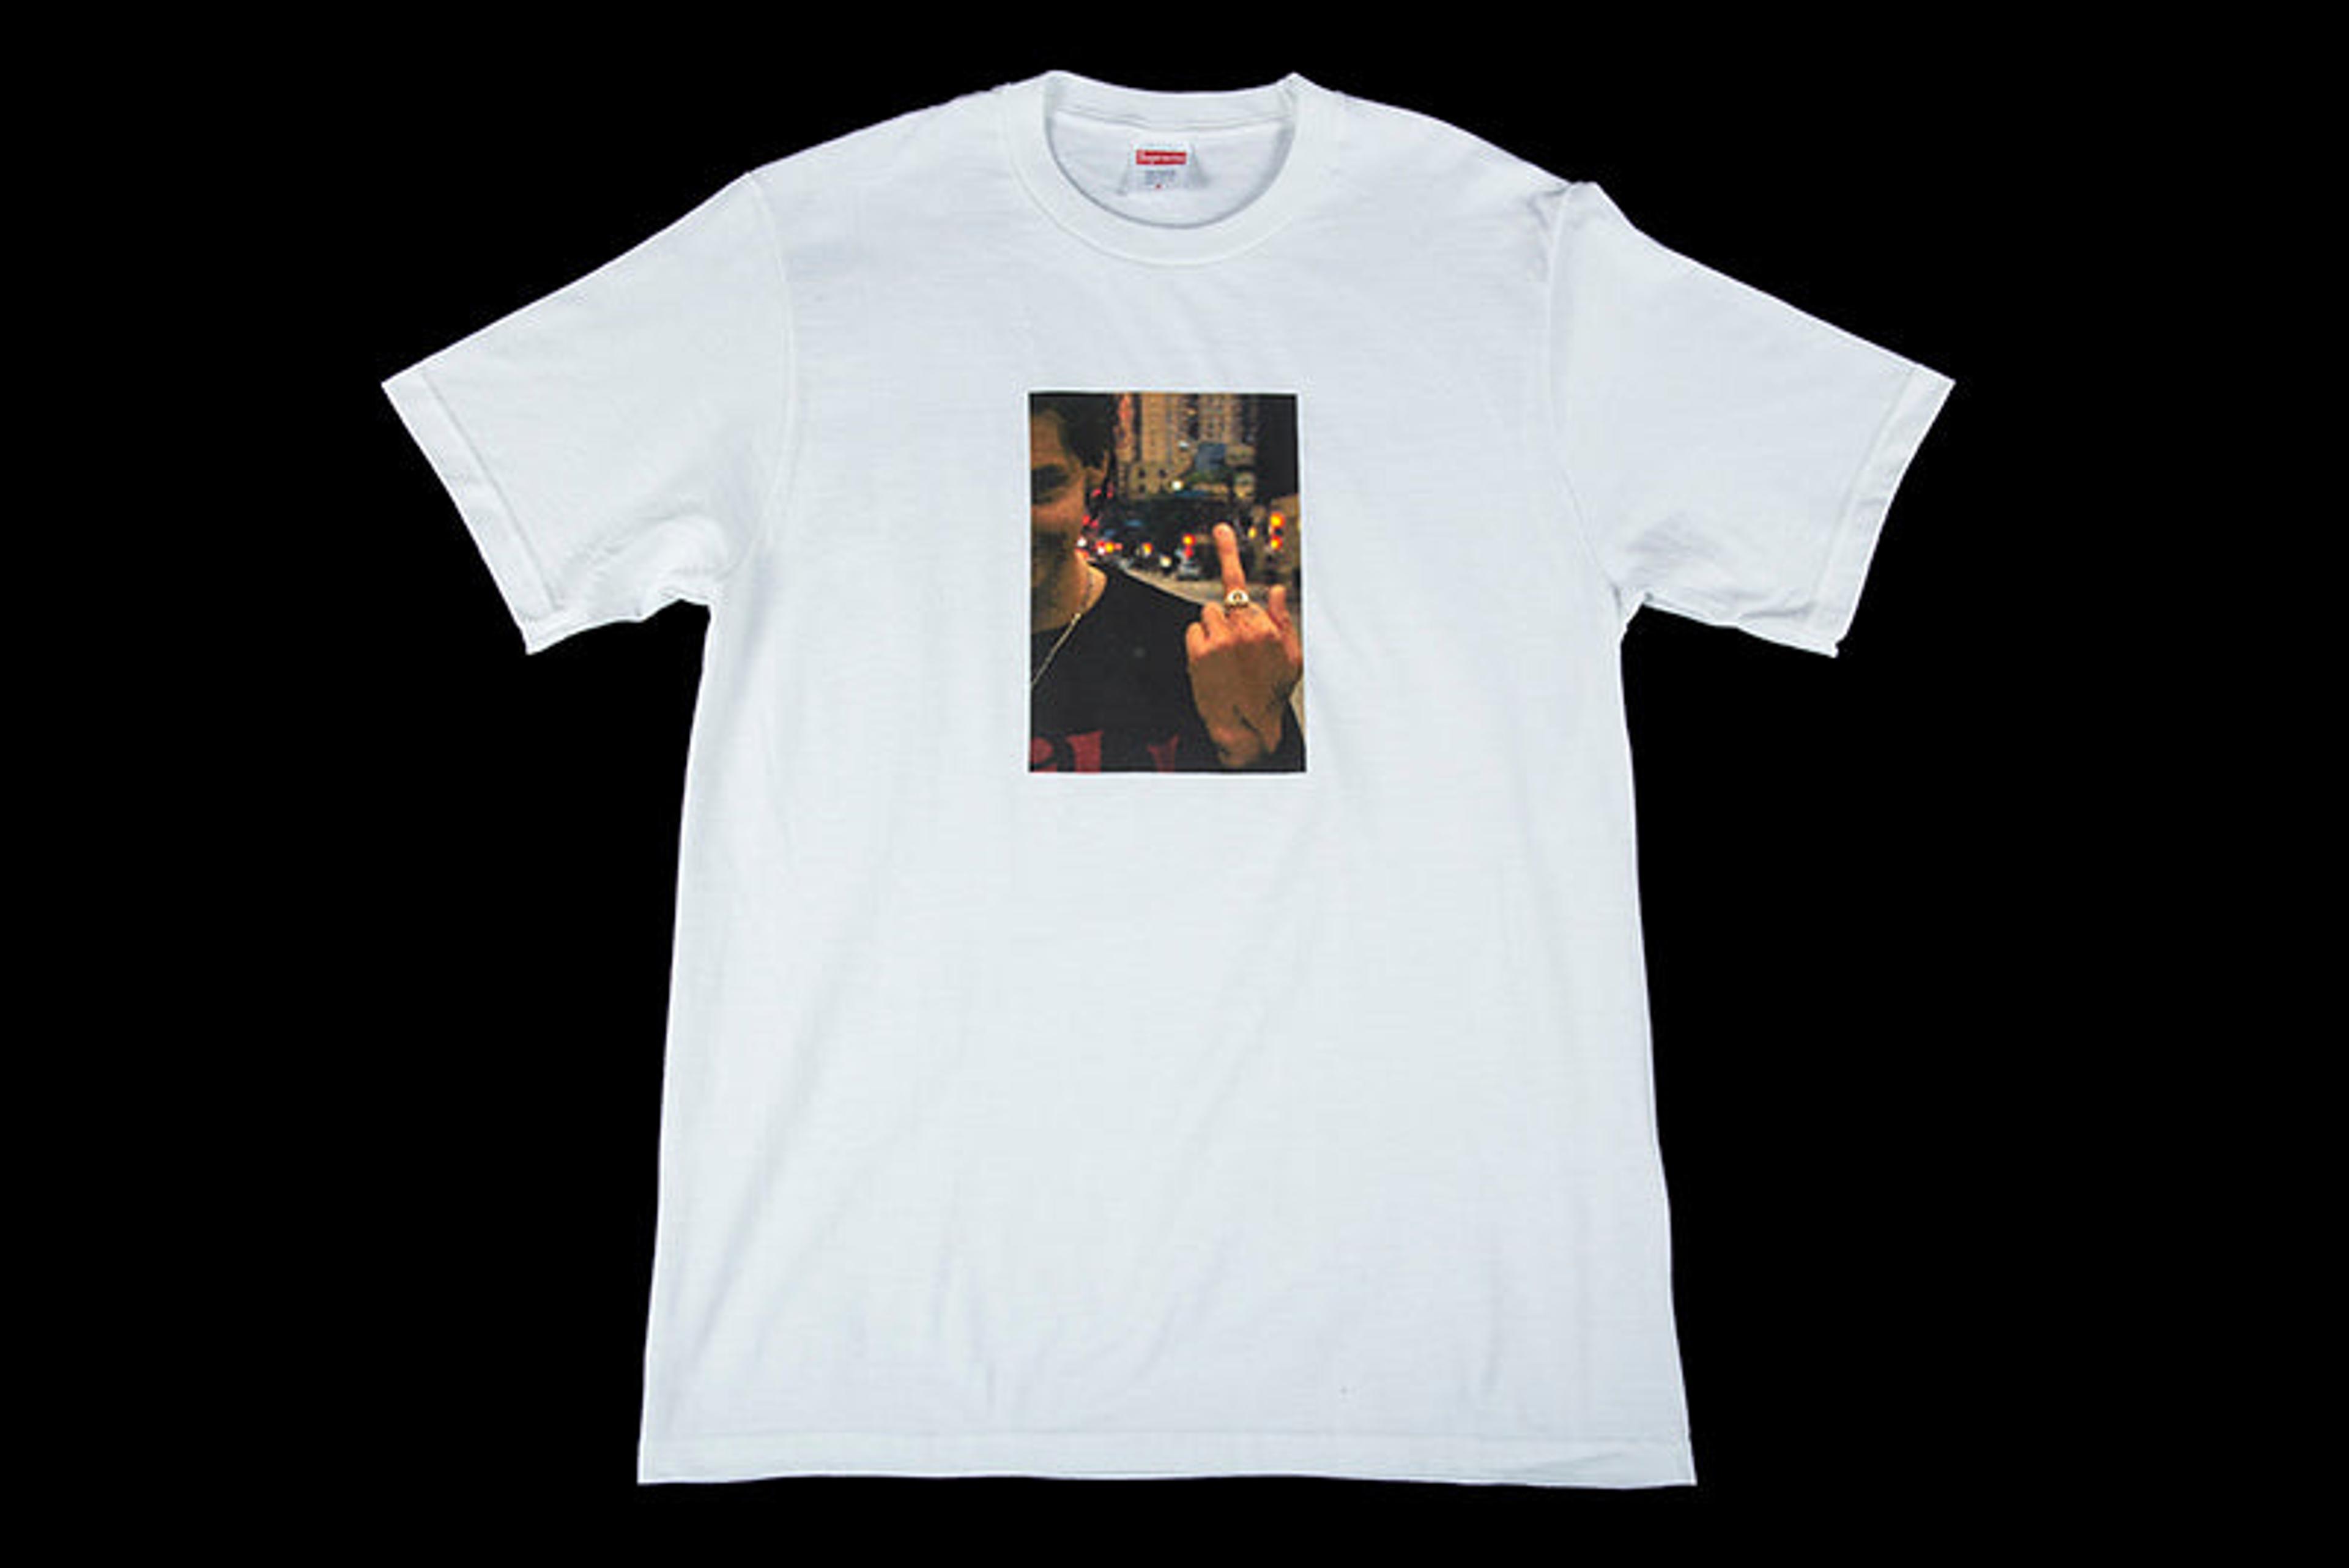 L supreme blessed tee +DVD